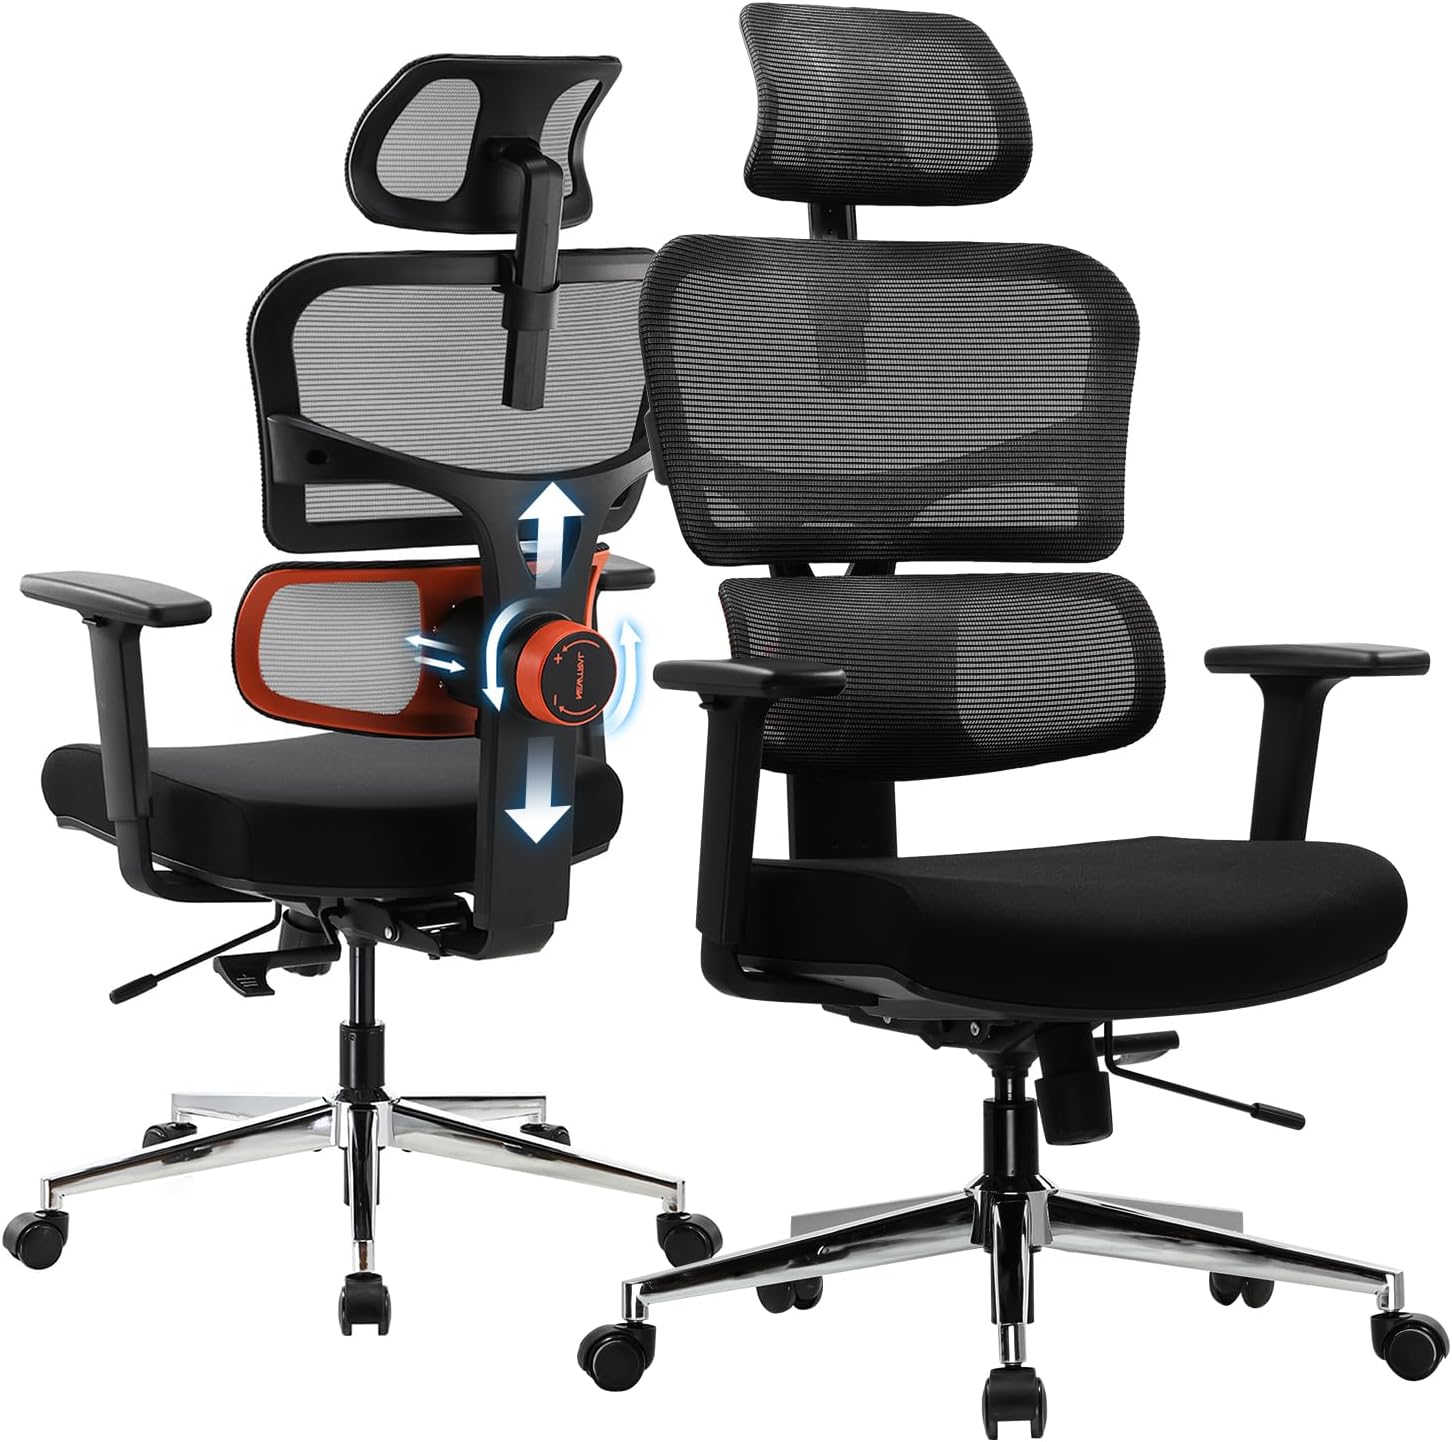 GTRACING Ergonimic Fabric Reclining Gaming Chair with Footrest and Linkage  Armrests, Black 